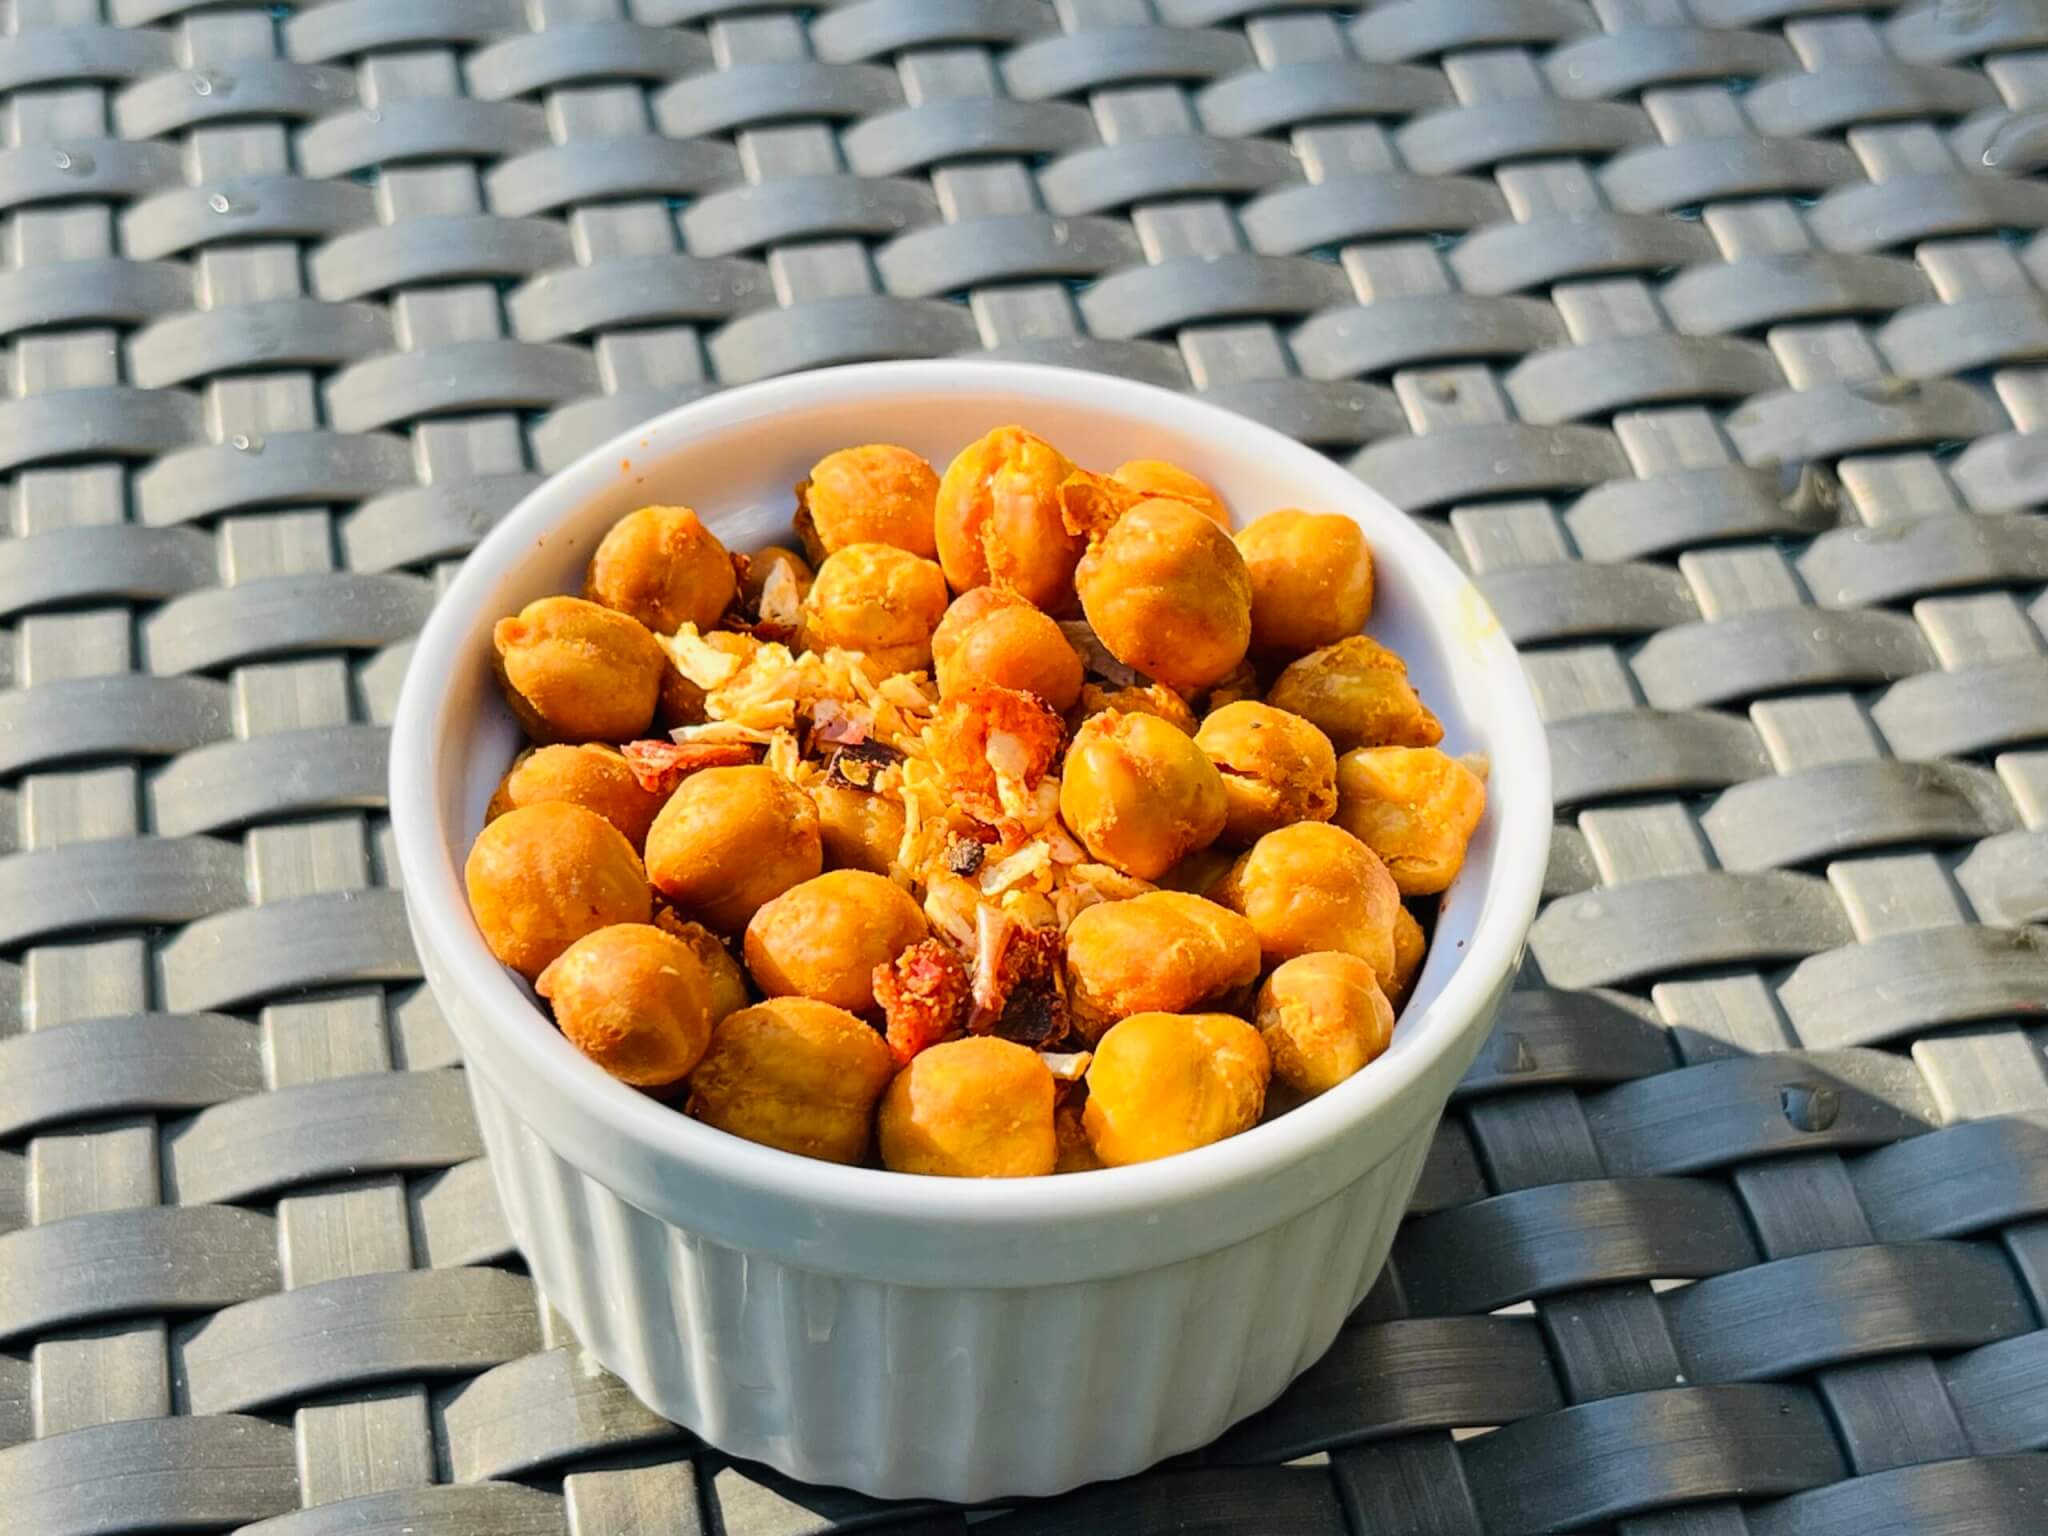 A small white bowl contained roasted Cajun Chickpeas